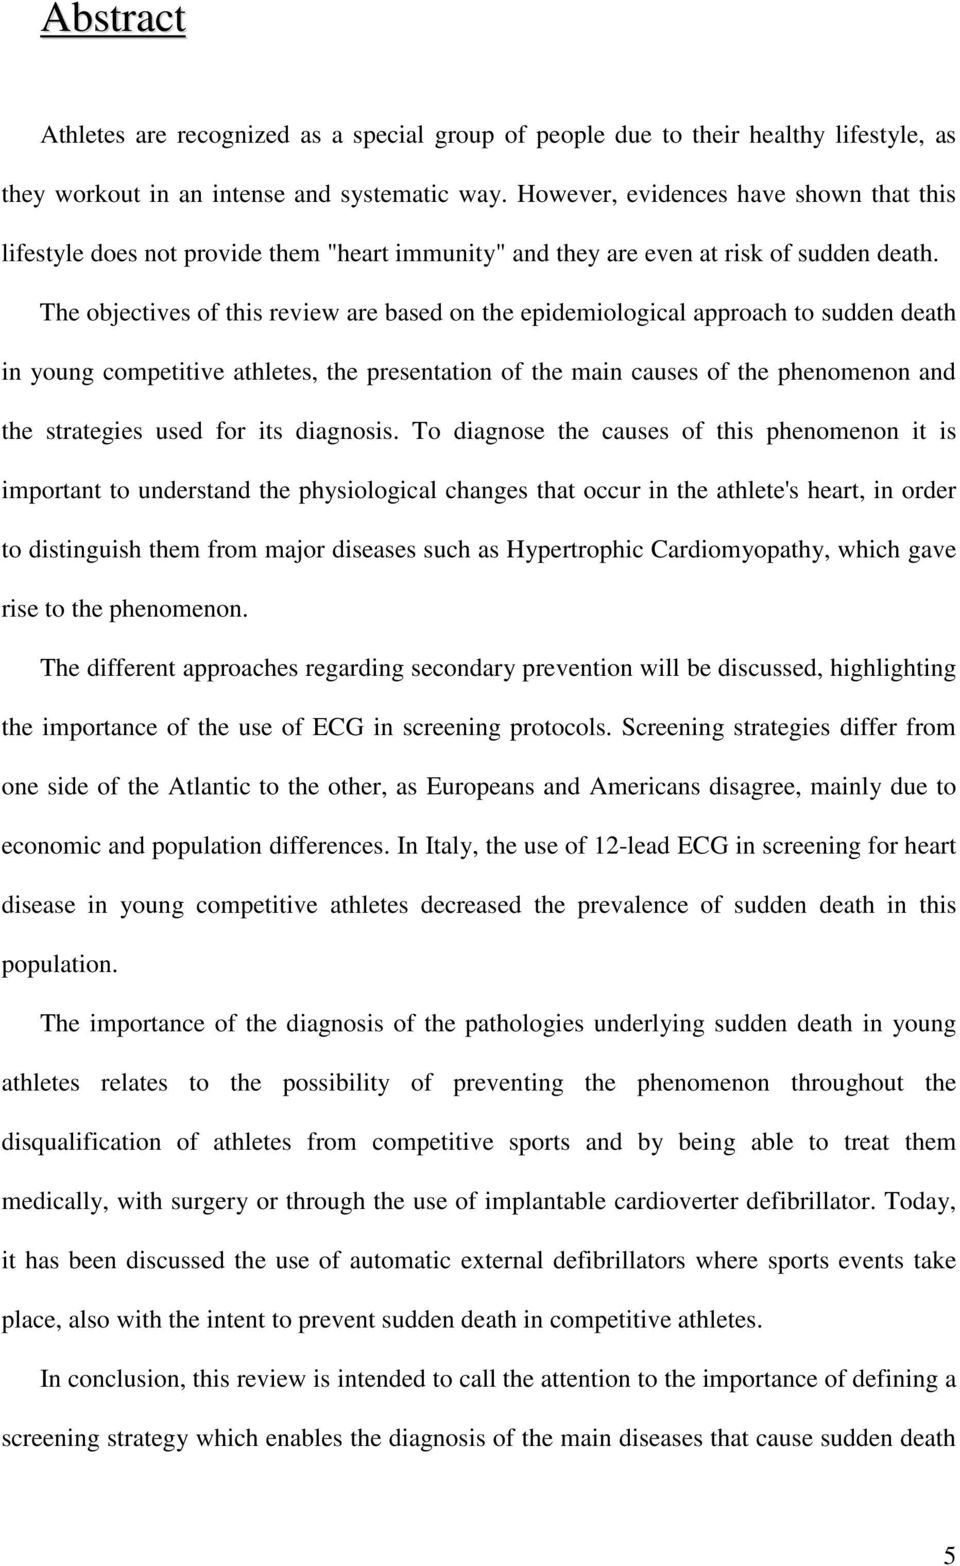 The objectives of this review are based on the epidemiological approach to sudden death in young competitive athletes, the presentation of the main causes of the phenomenon and the strategies used